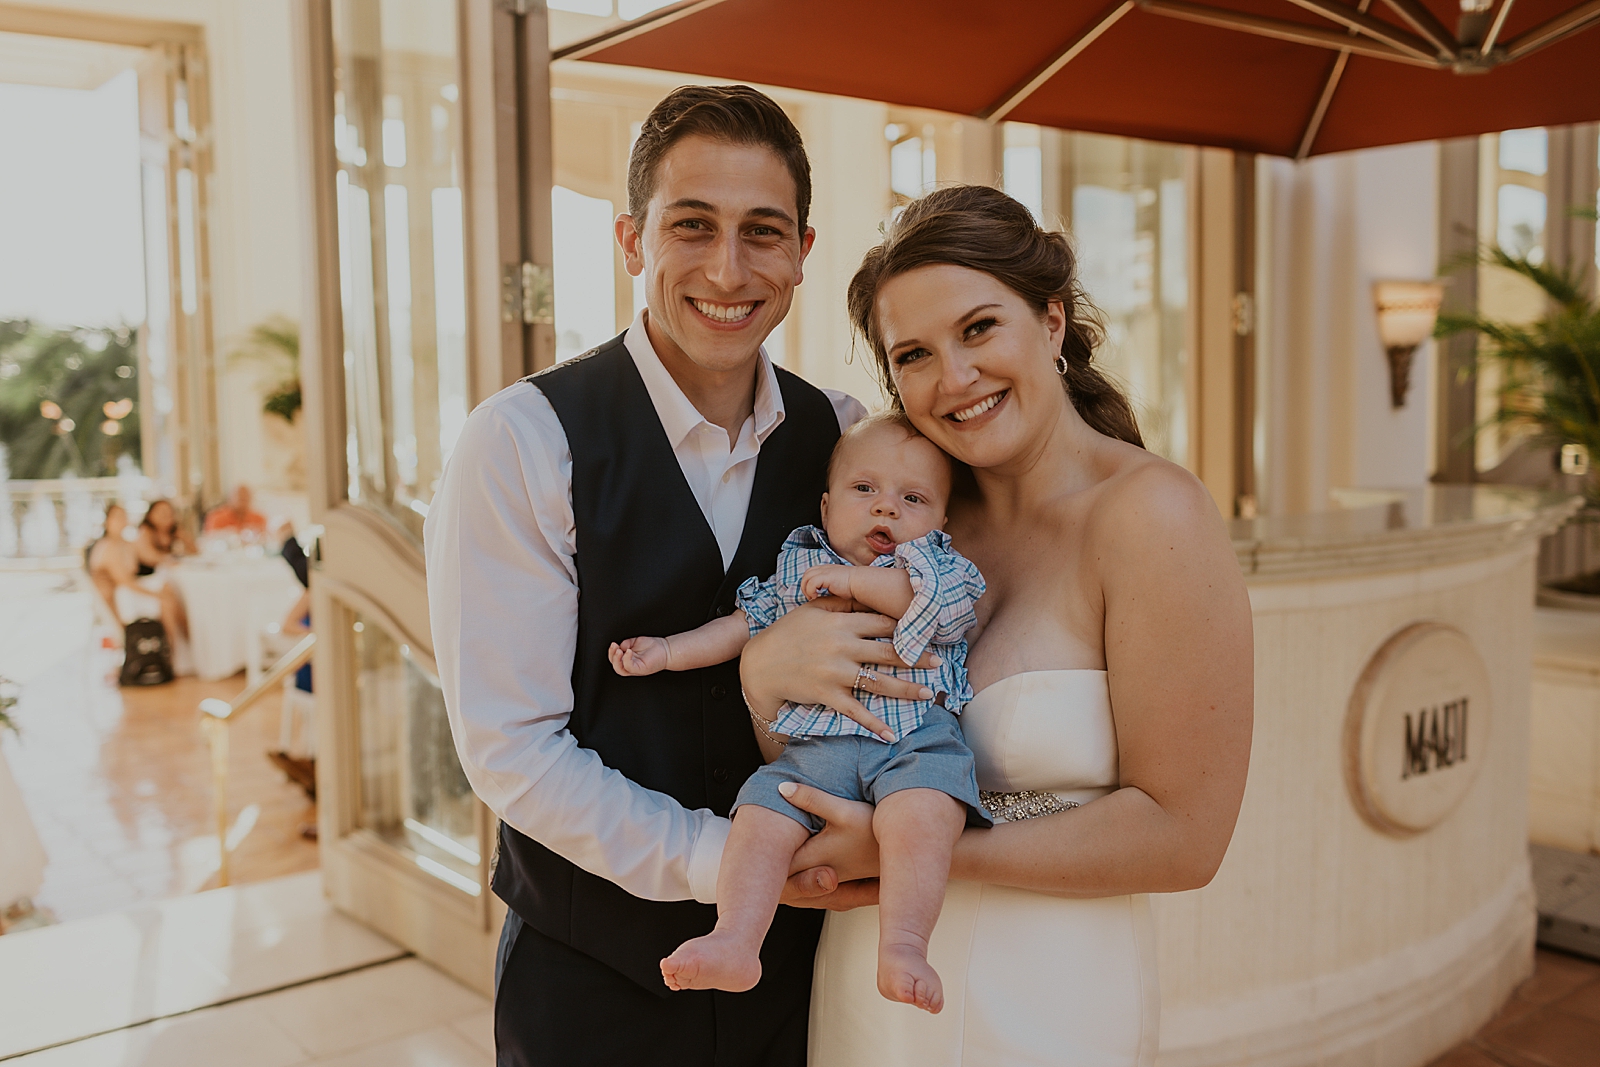 Bride and Groom holding Baby together at Reception